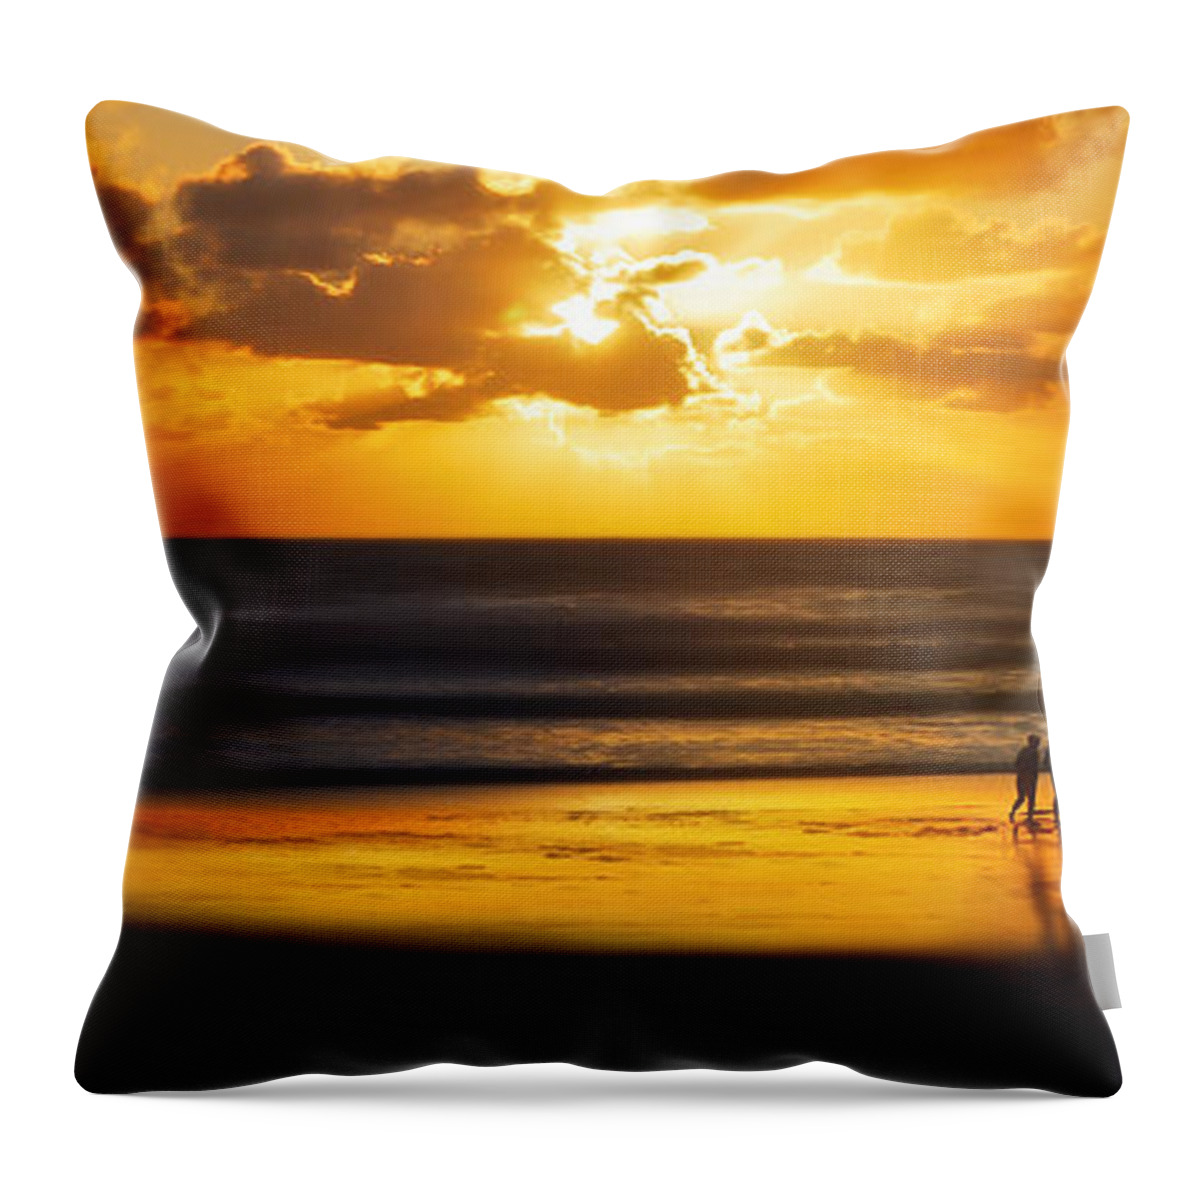 Sunset Throw Pillow featuring the photograph Walking Into The Sunlight by Hannes Cmarits